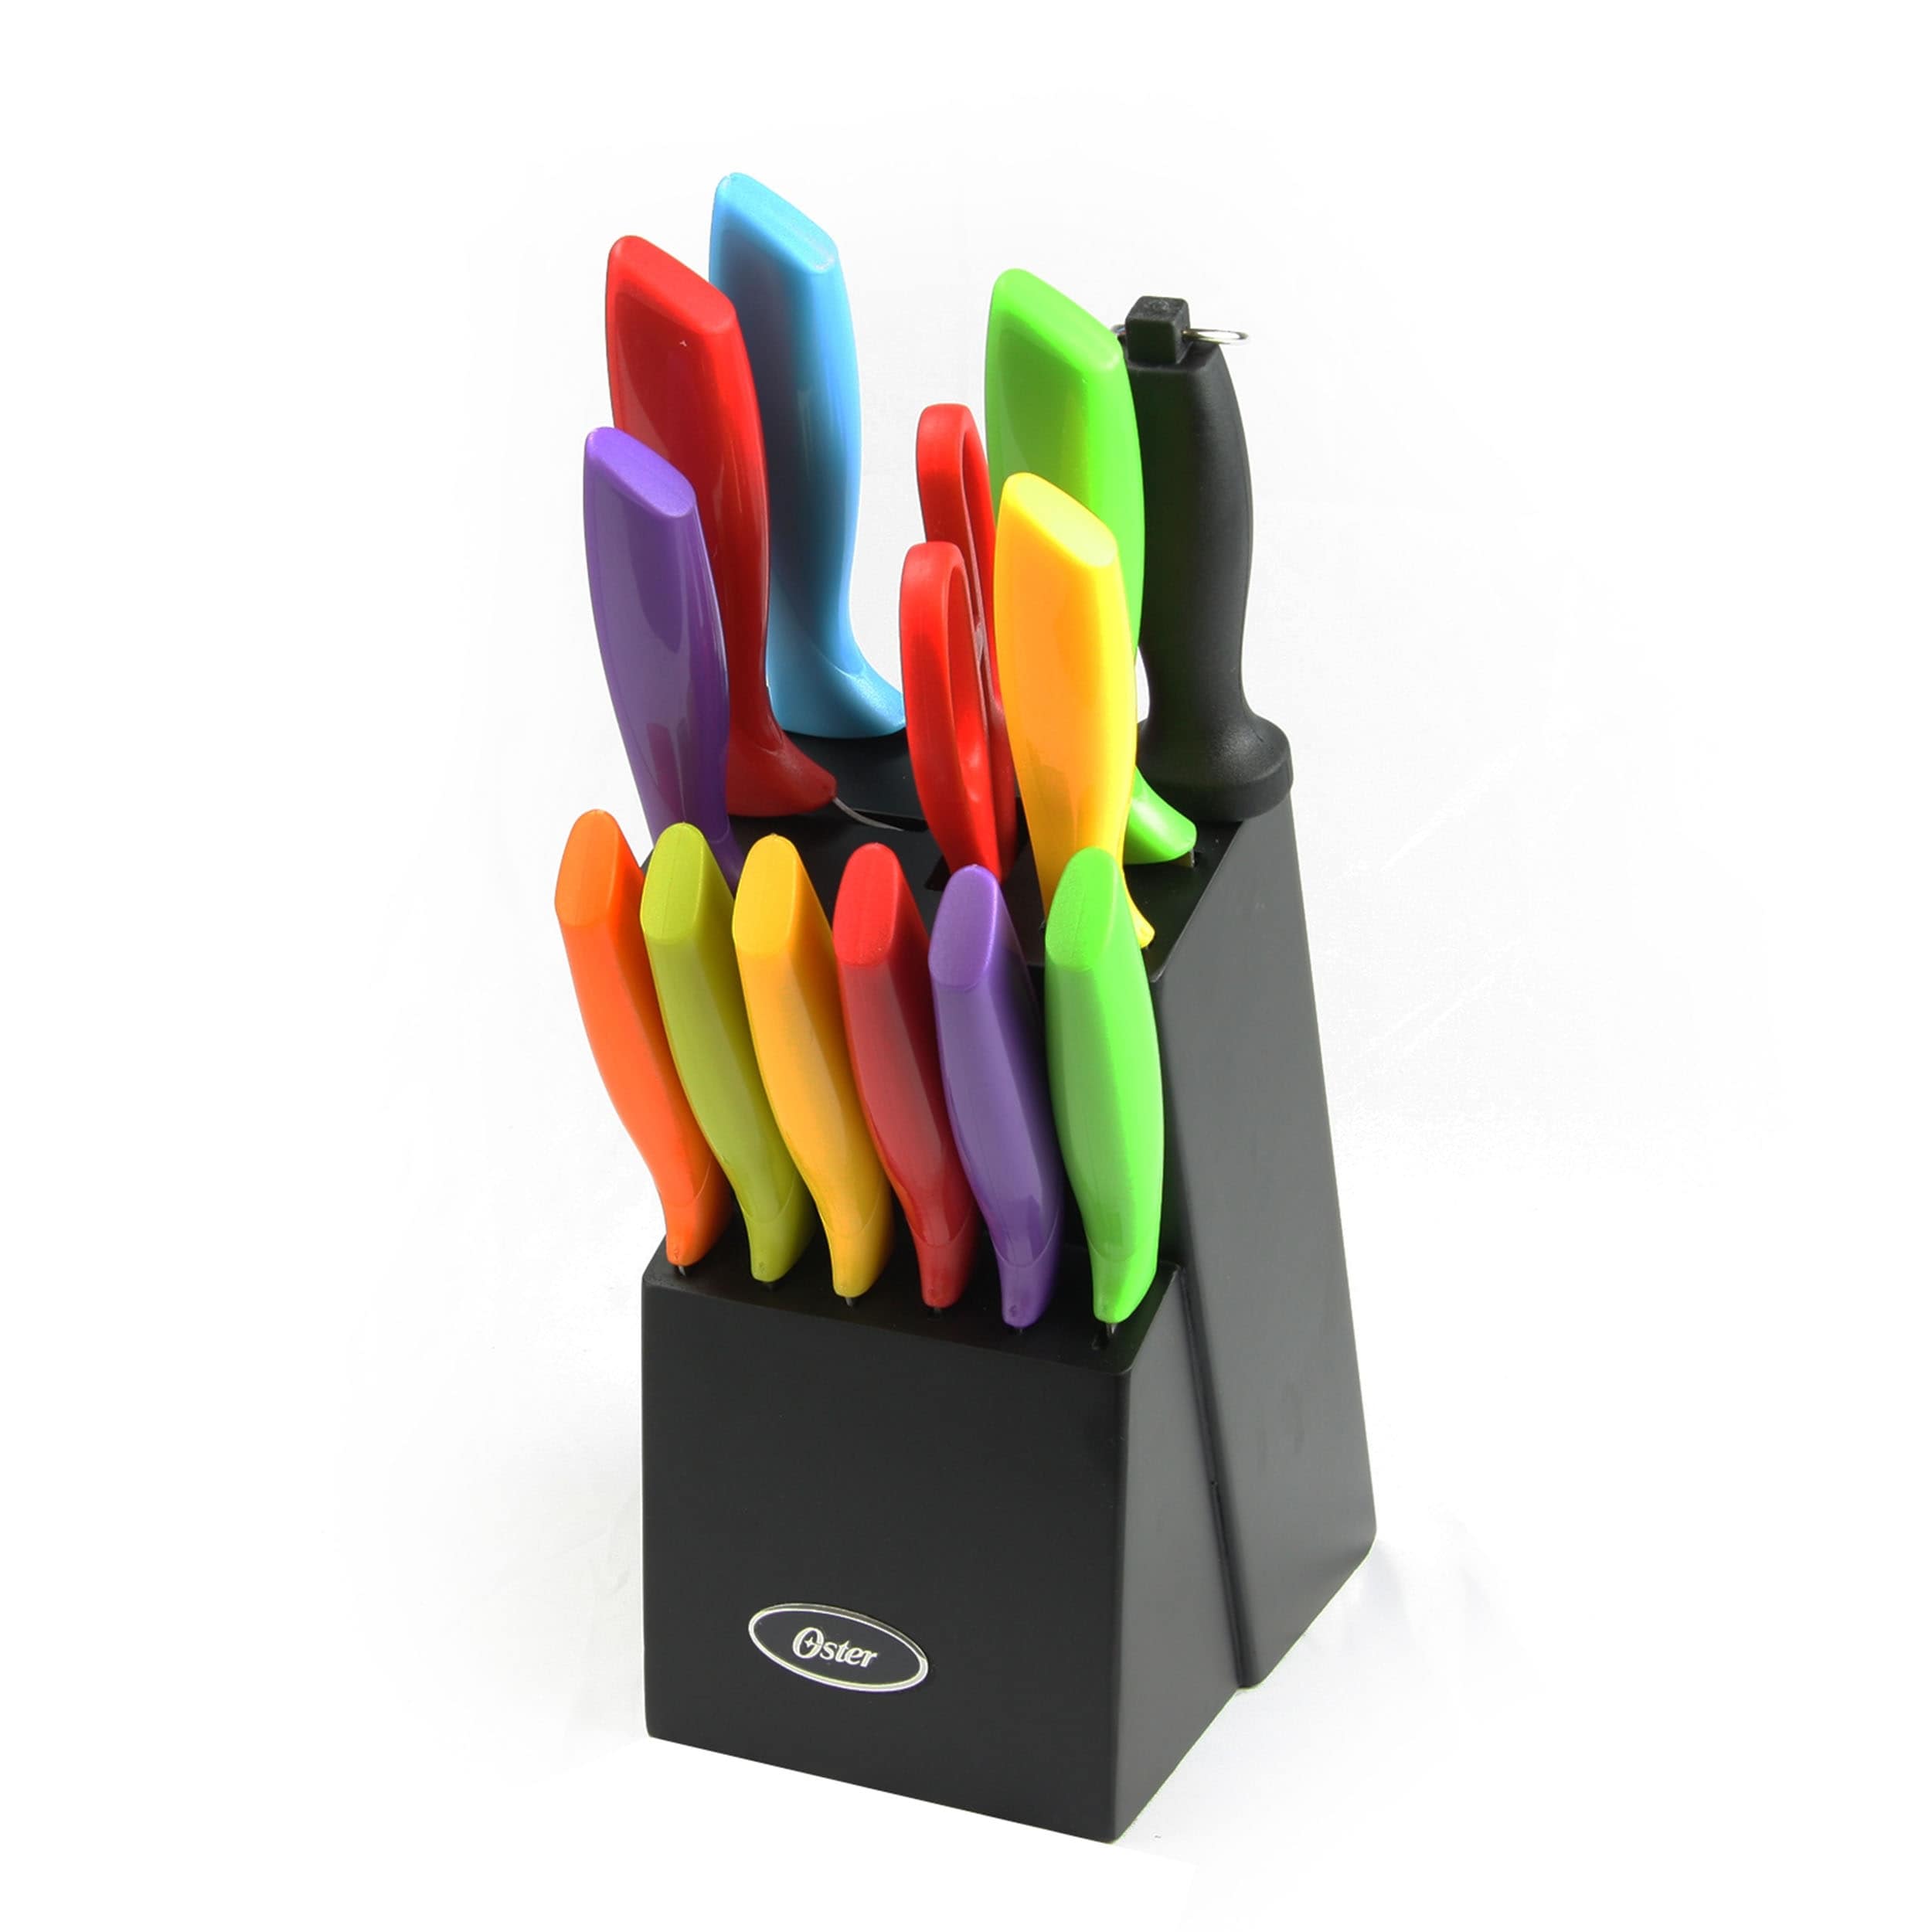 https://ak1.ostkcdn.com/images/products/is/images/direct/c062e3a3327e600e85bce20d0ffc6511807d0772/Oster-14-Piece-Stainless-Steel-Assorted-Color-Cutlery-Knife-Set-with-Wood-Storage-Block.jpg